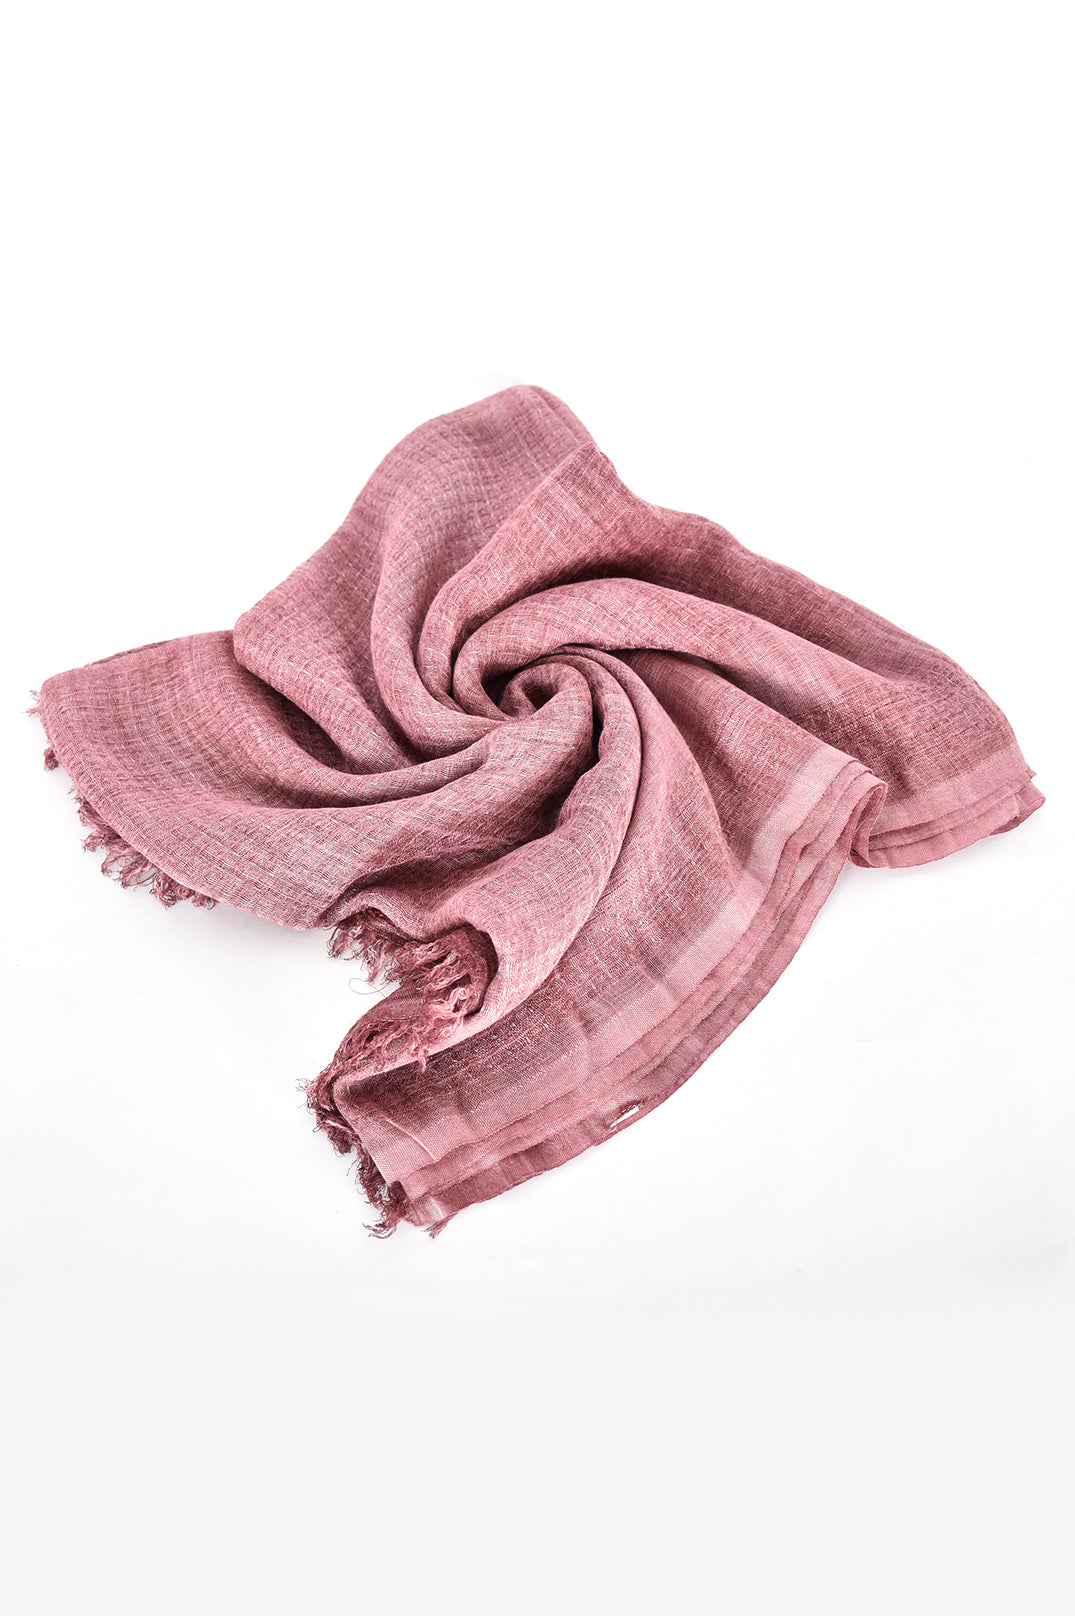 Lightweight Everyday Scarf in Berry